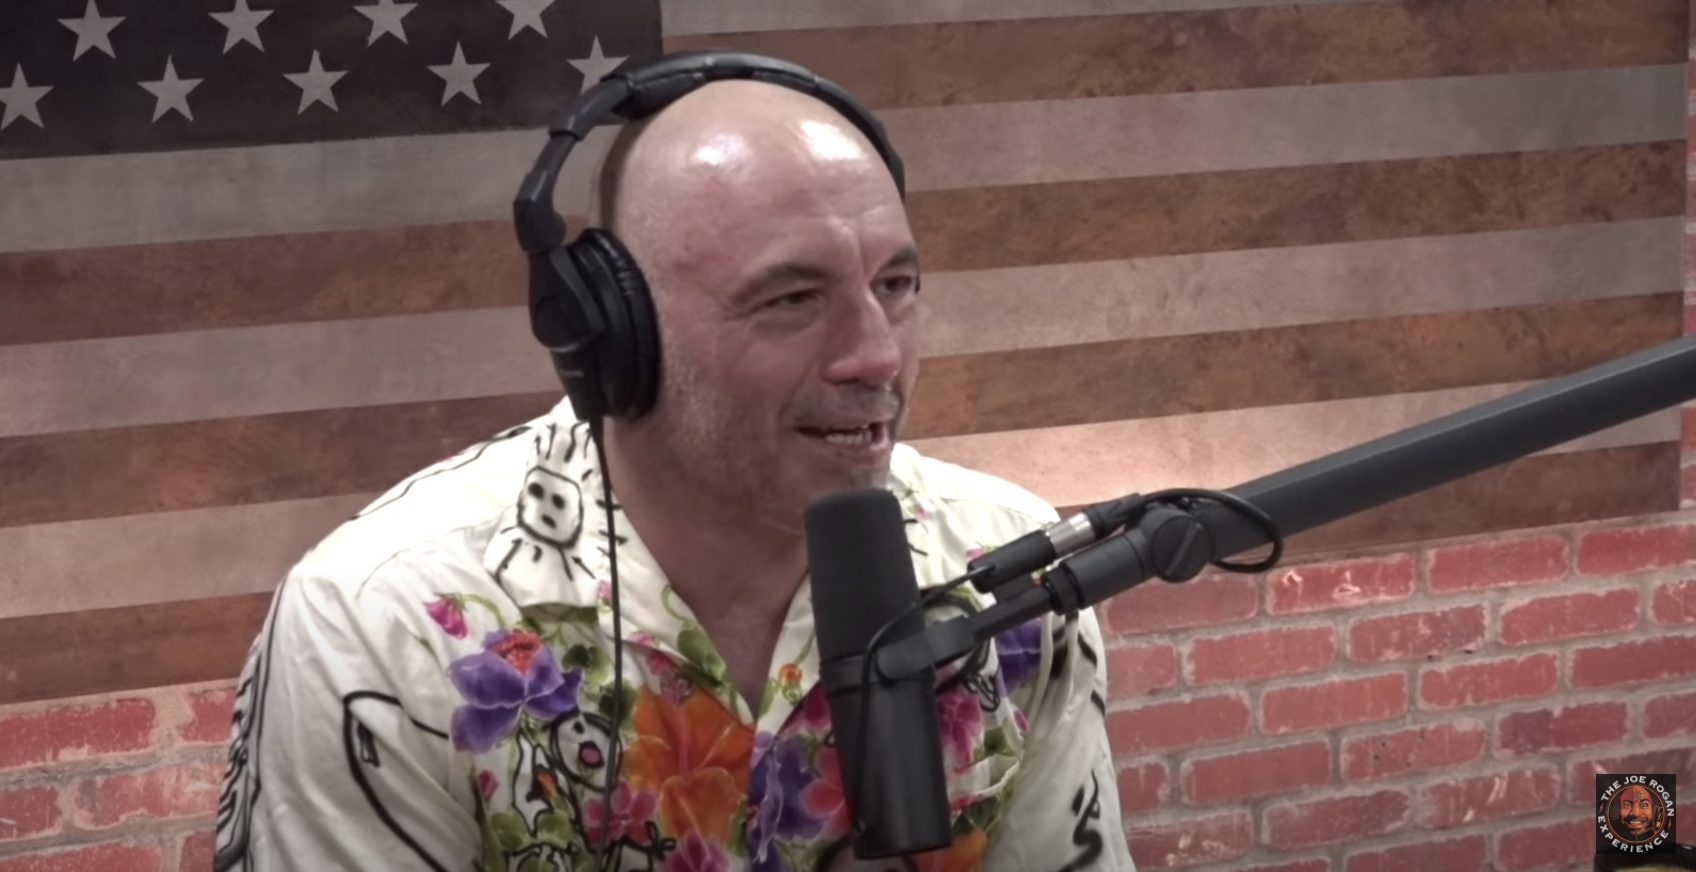 Joe Rogan saying &quot;They all do the same move&quot;